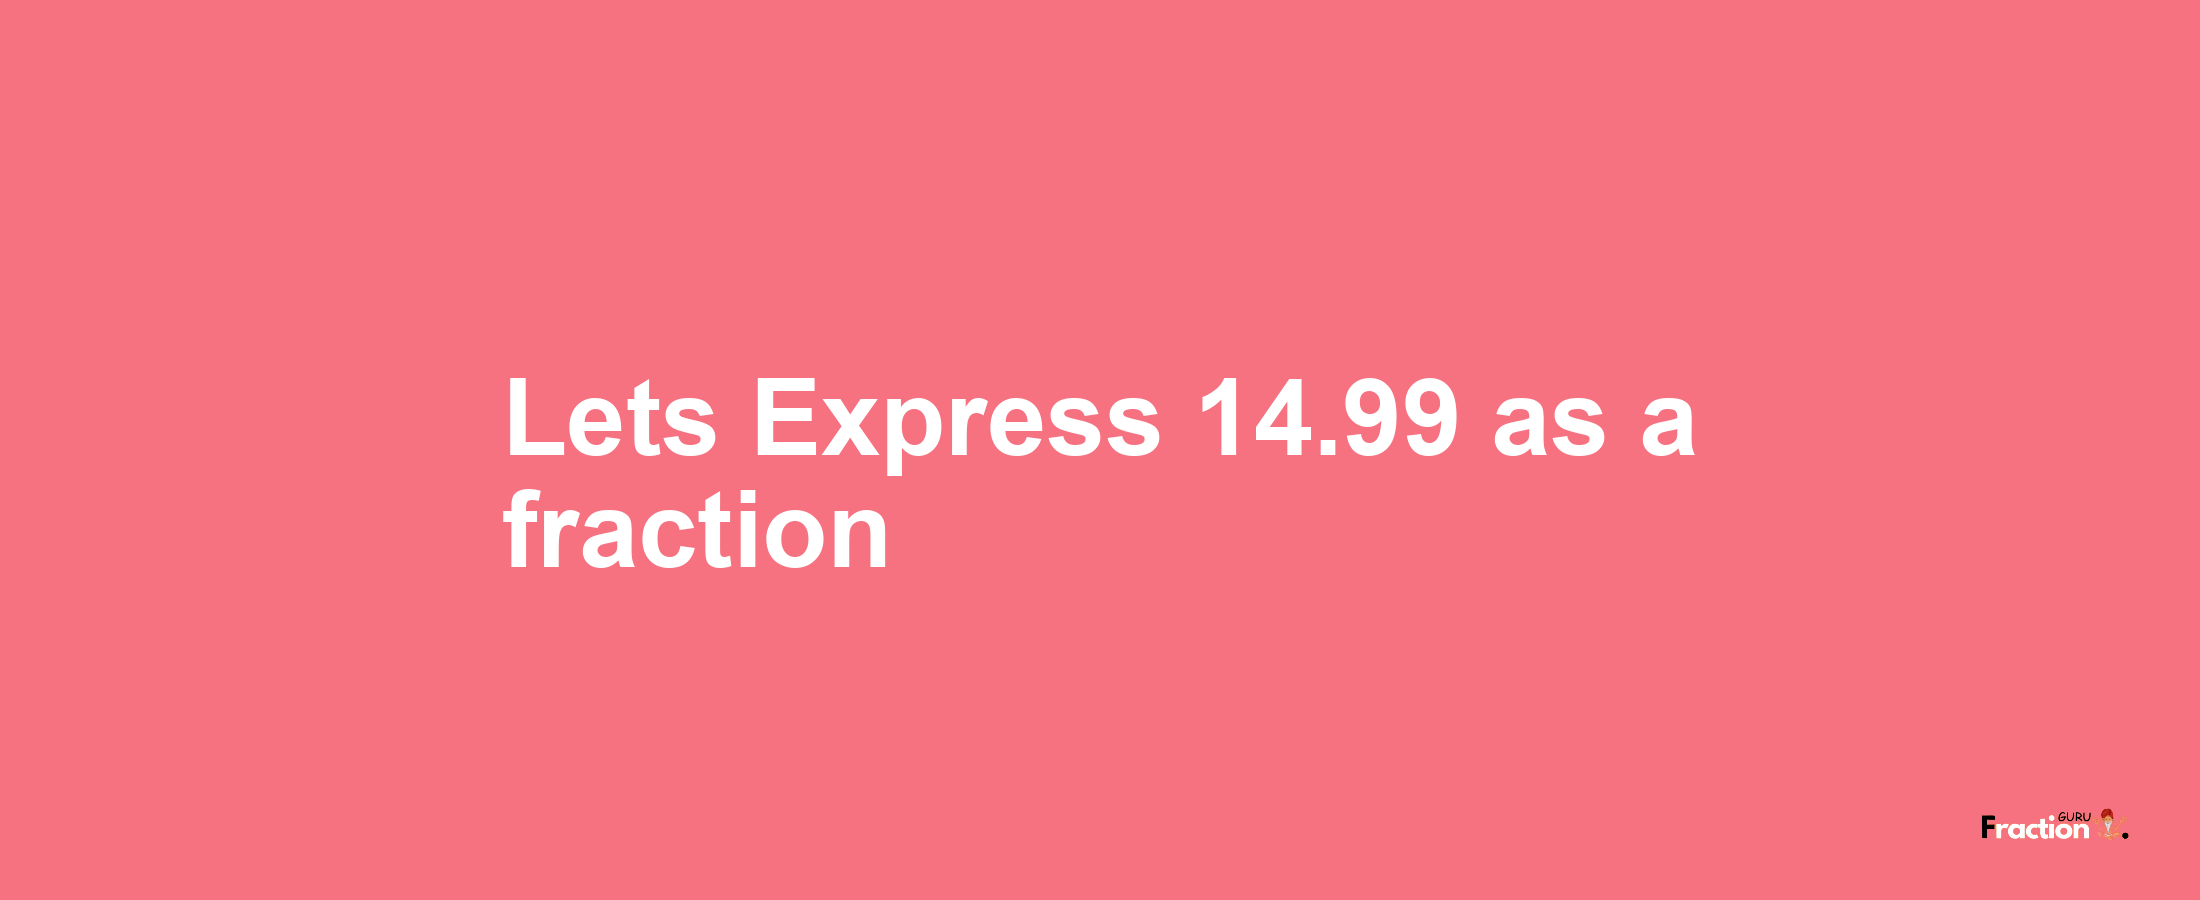 Lets Express 14.99 as afraction